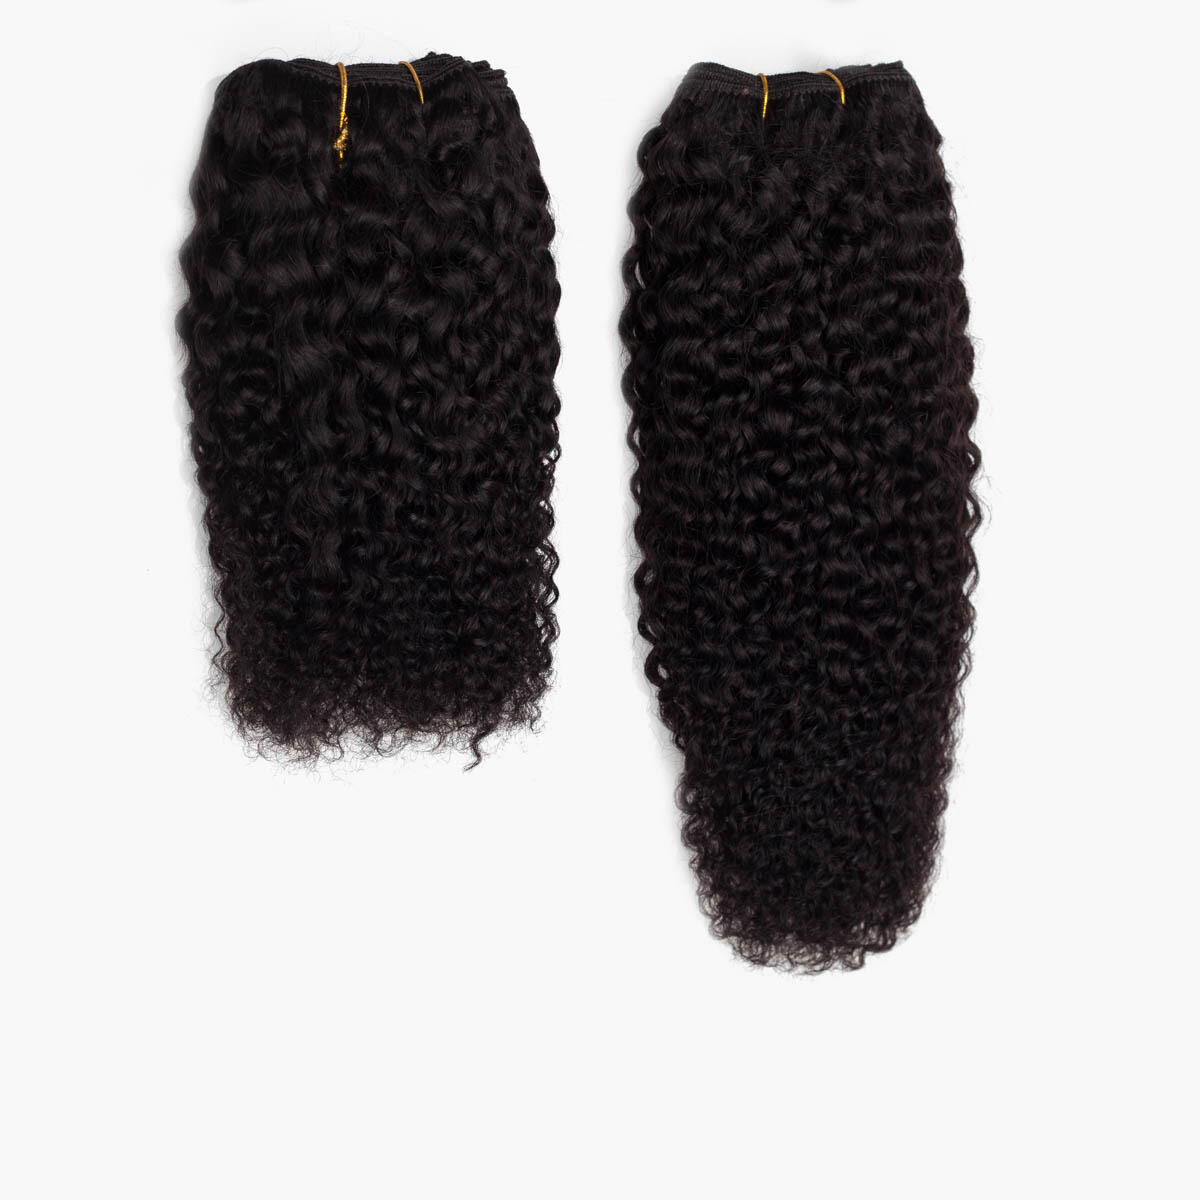 Hair Weft Coily Curl 1.2 Black Brown 25 cm